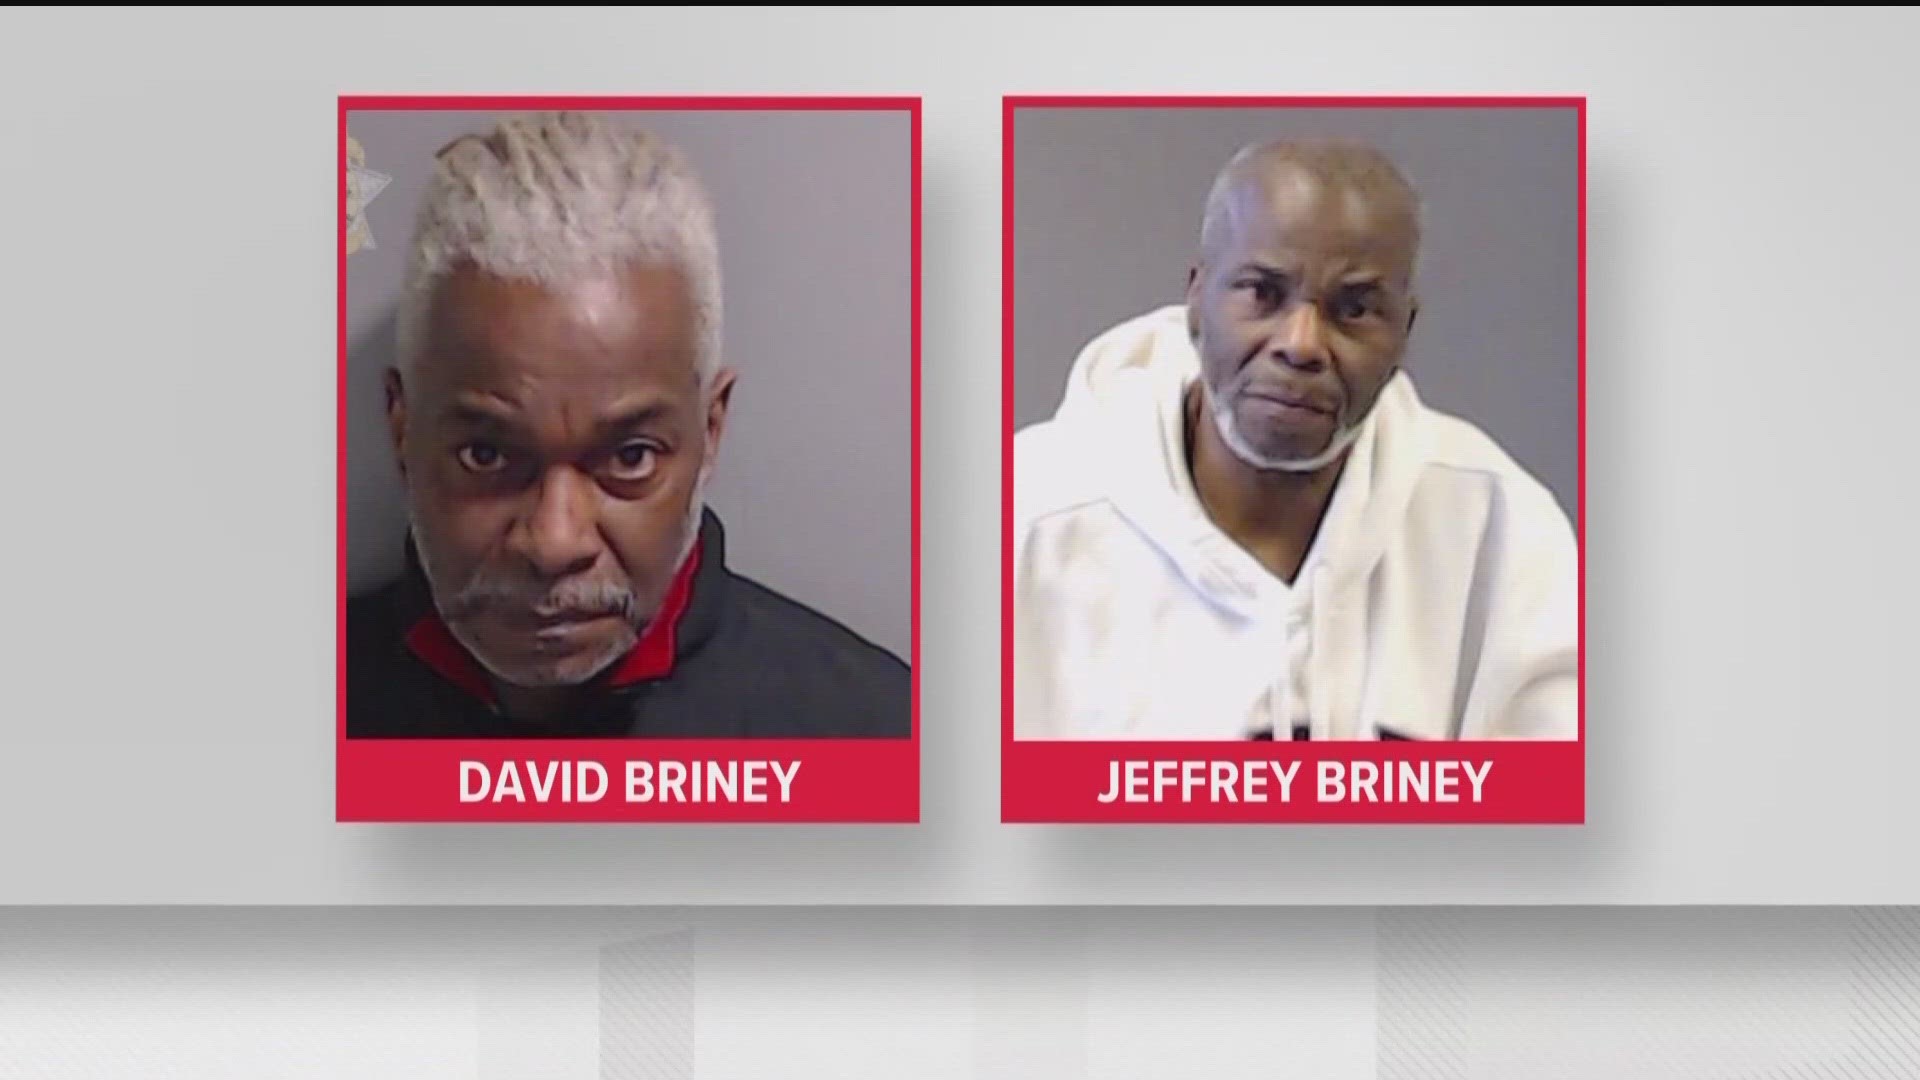 DeKalb County District Attorney Sherry Boston announced the indictments of two suspects in connection to multiple decades-old rape cases on Wednesday.